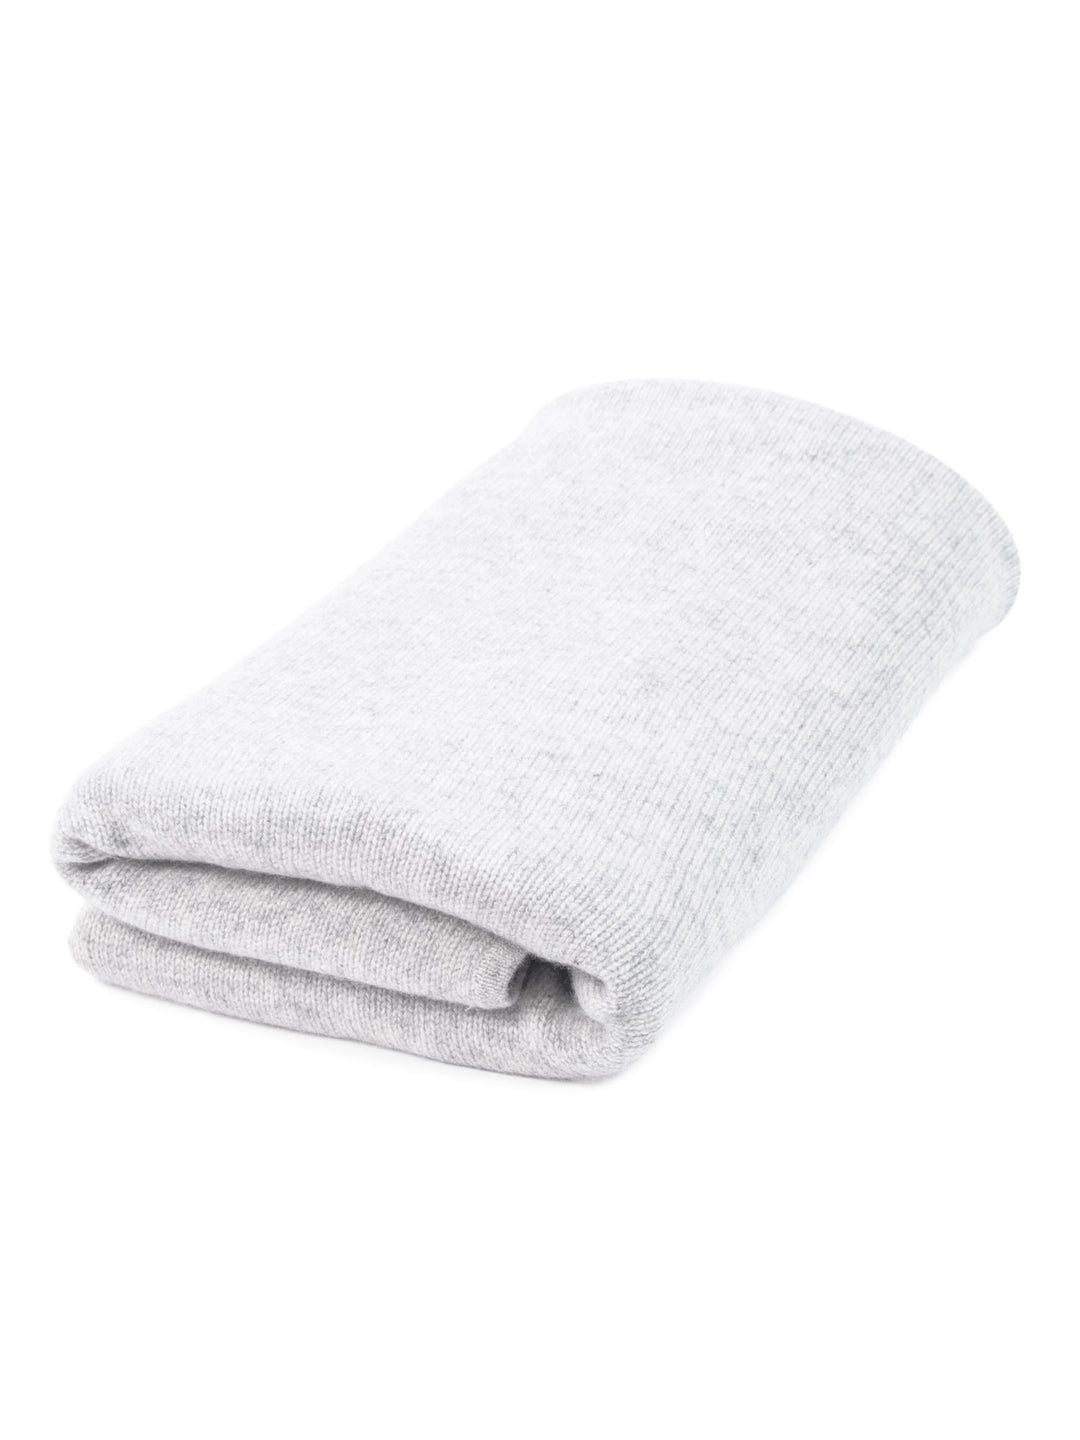 Baby blanket in 100% cashmere from Kashmina